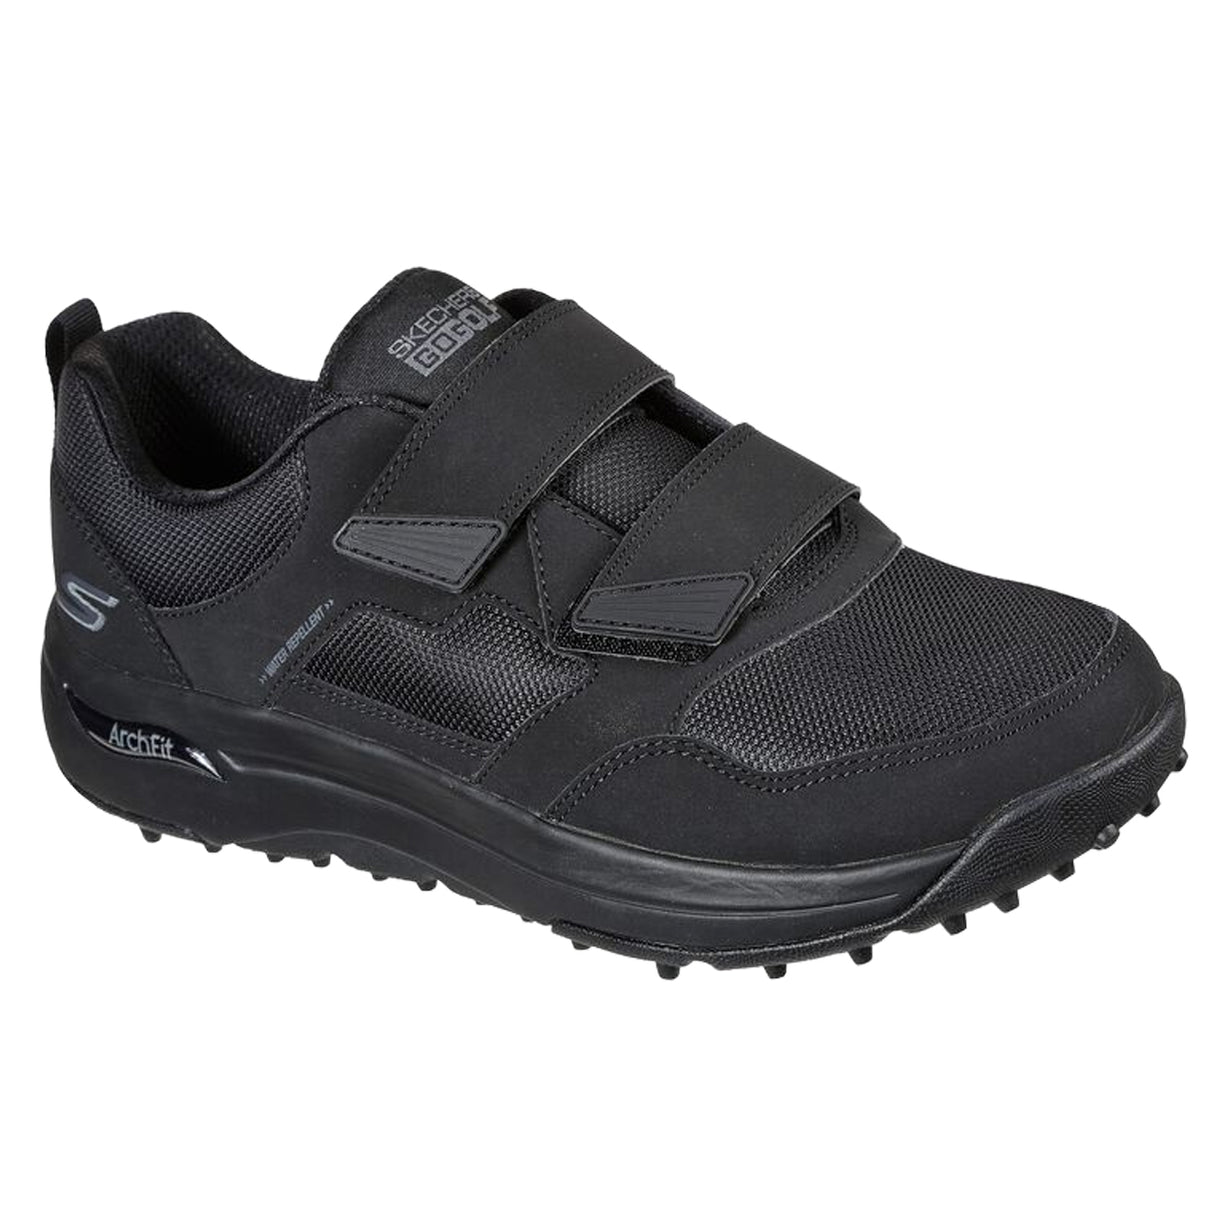 Skechers GOgolf Arch Fit Front Nine Spikeless Golf Shoe